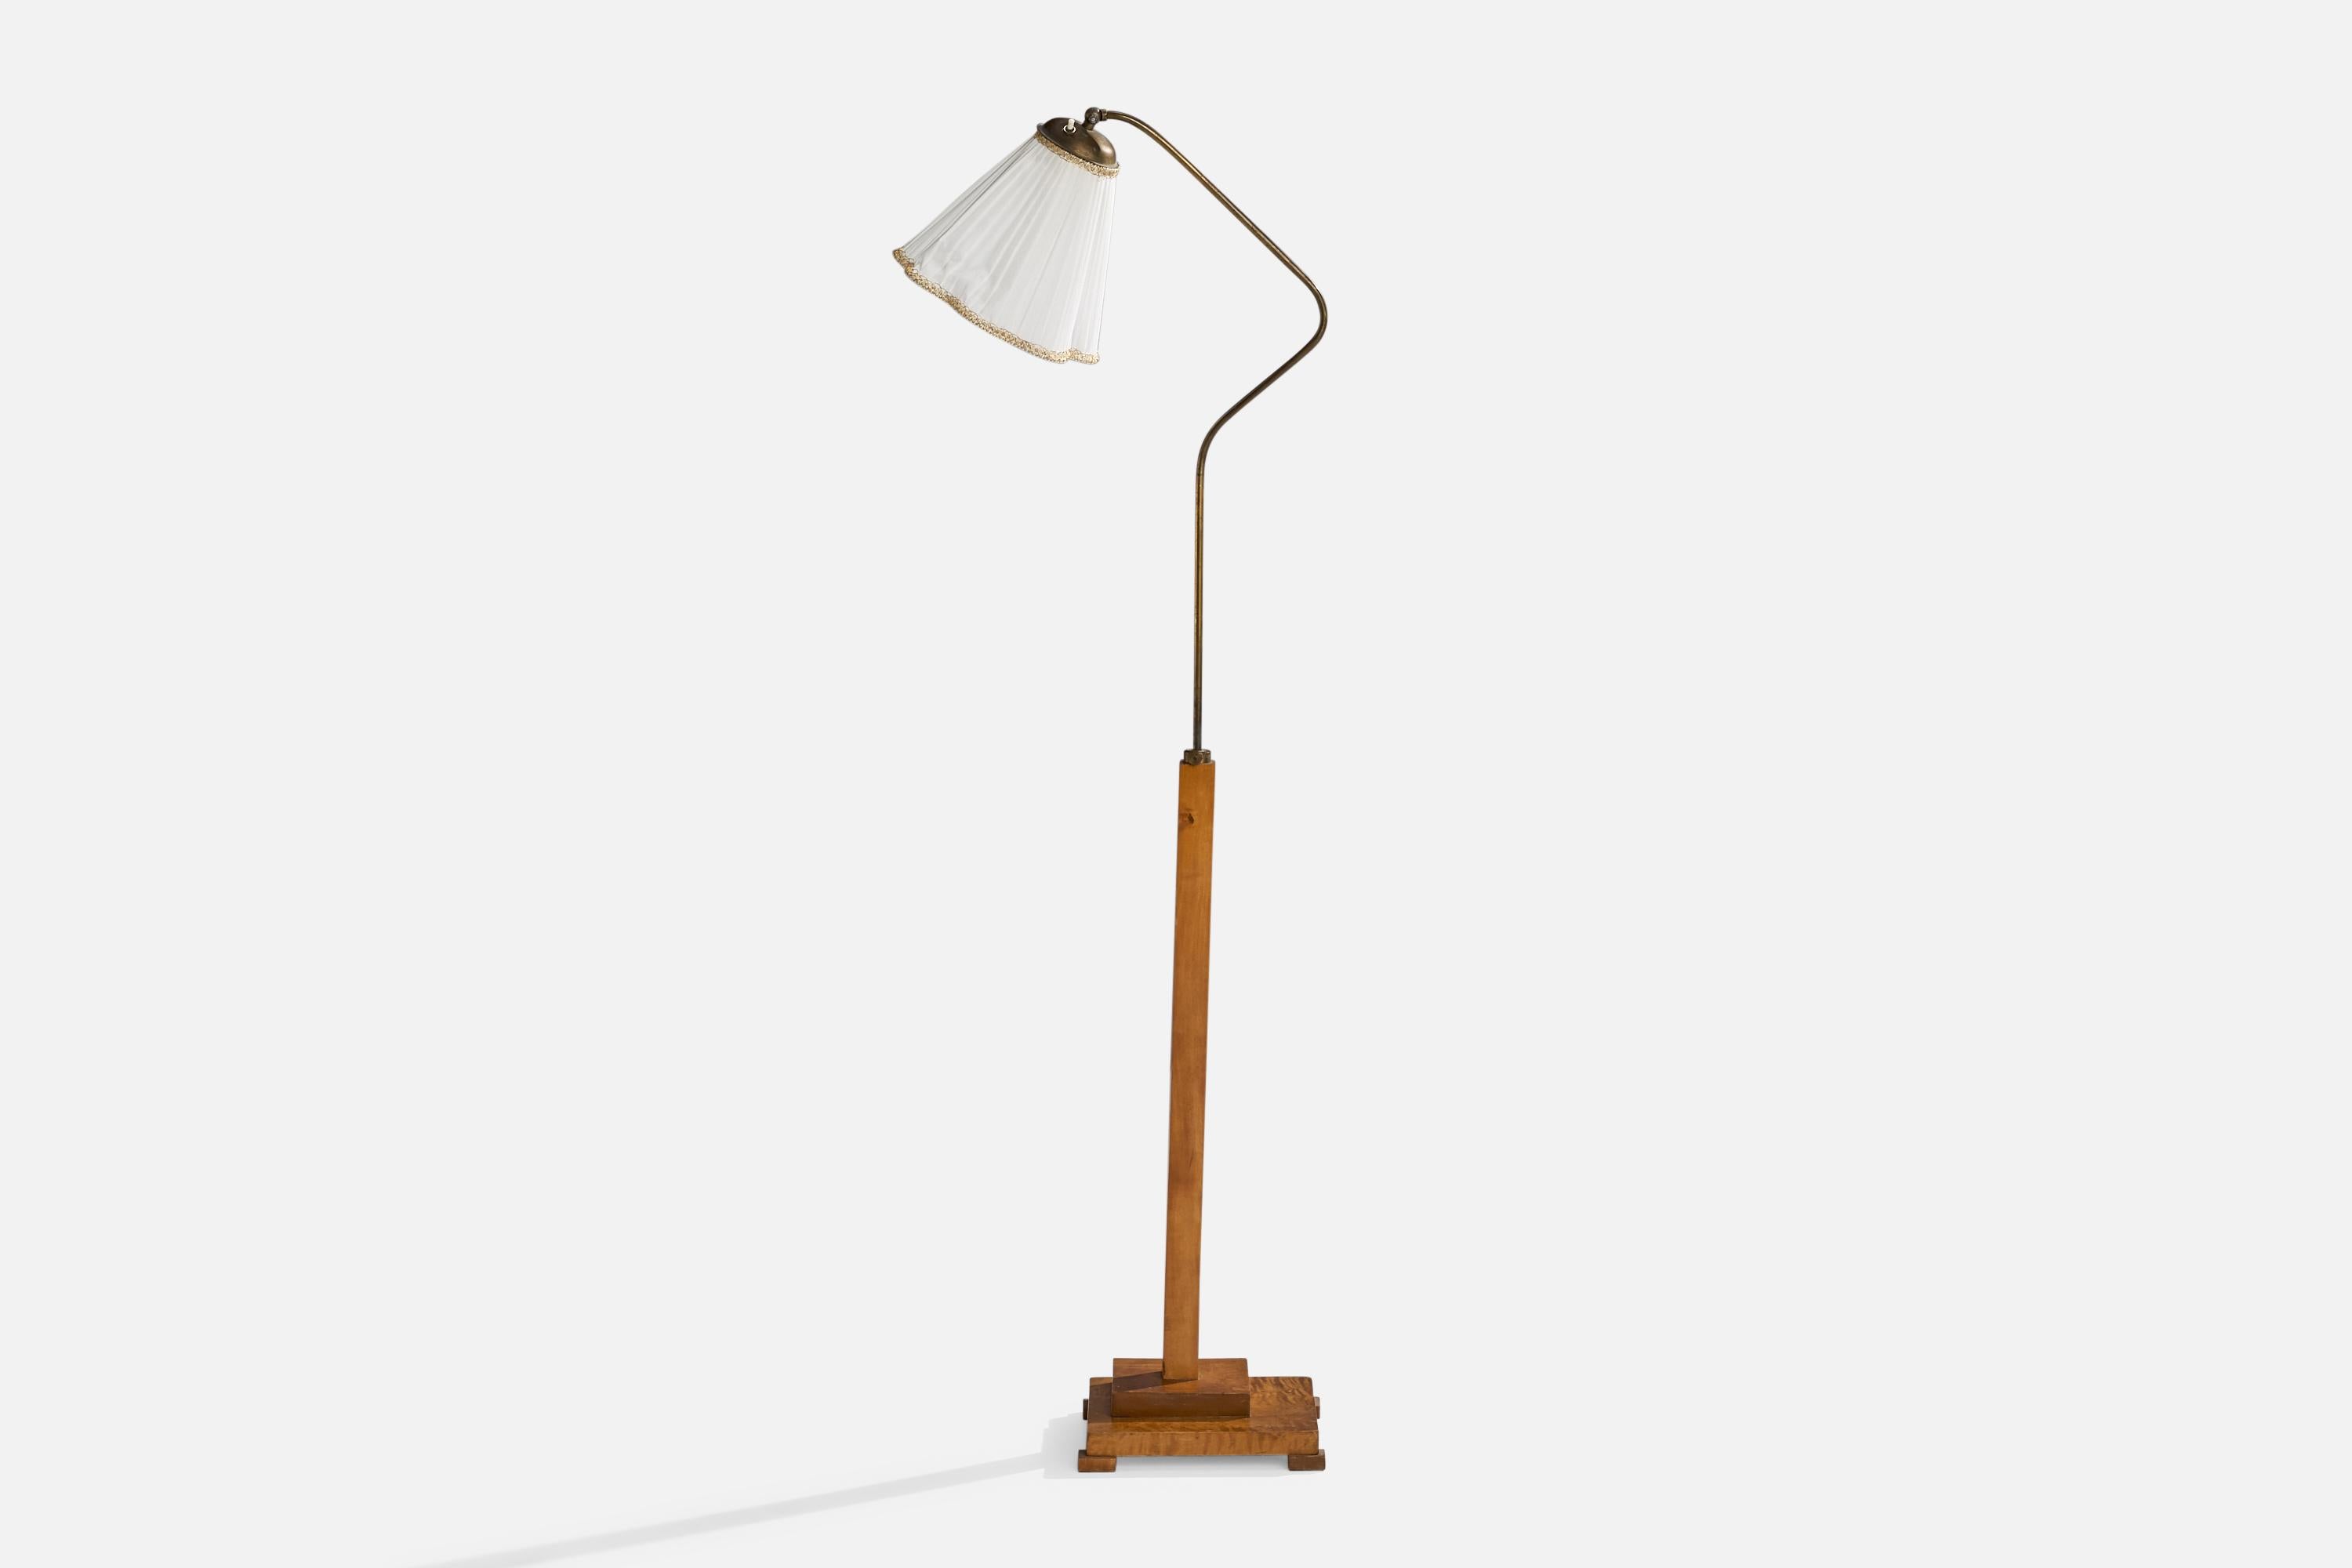 A brass, birch and white fabric floor lamp designed and produced in Sweden, 1930s.

Overall Dimensions (inches): 57.5”  H x 10” W x 18”  D
Stated dimensions include shade.
Bulb Specifications: E-26 Bulb
Number of Sockets: 1
All lighting will be